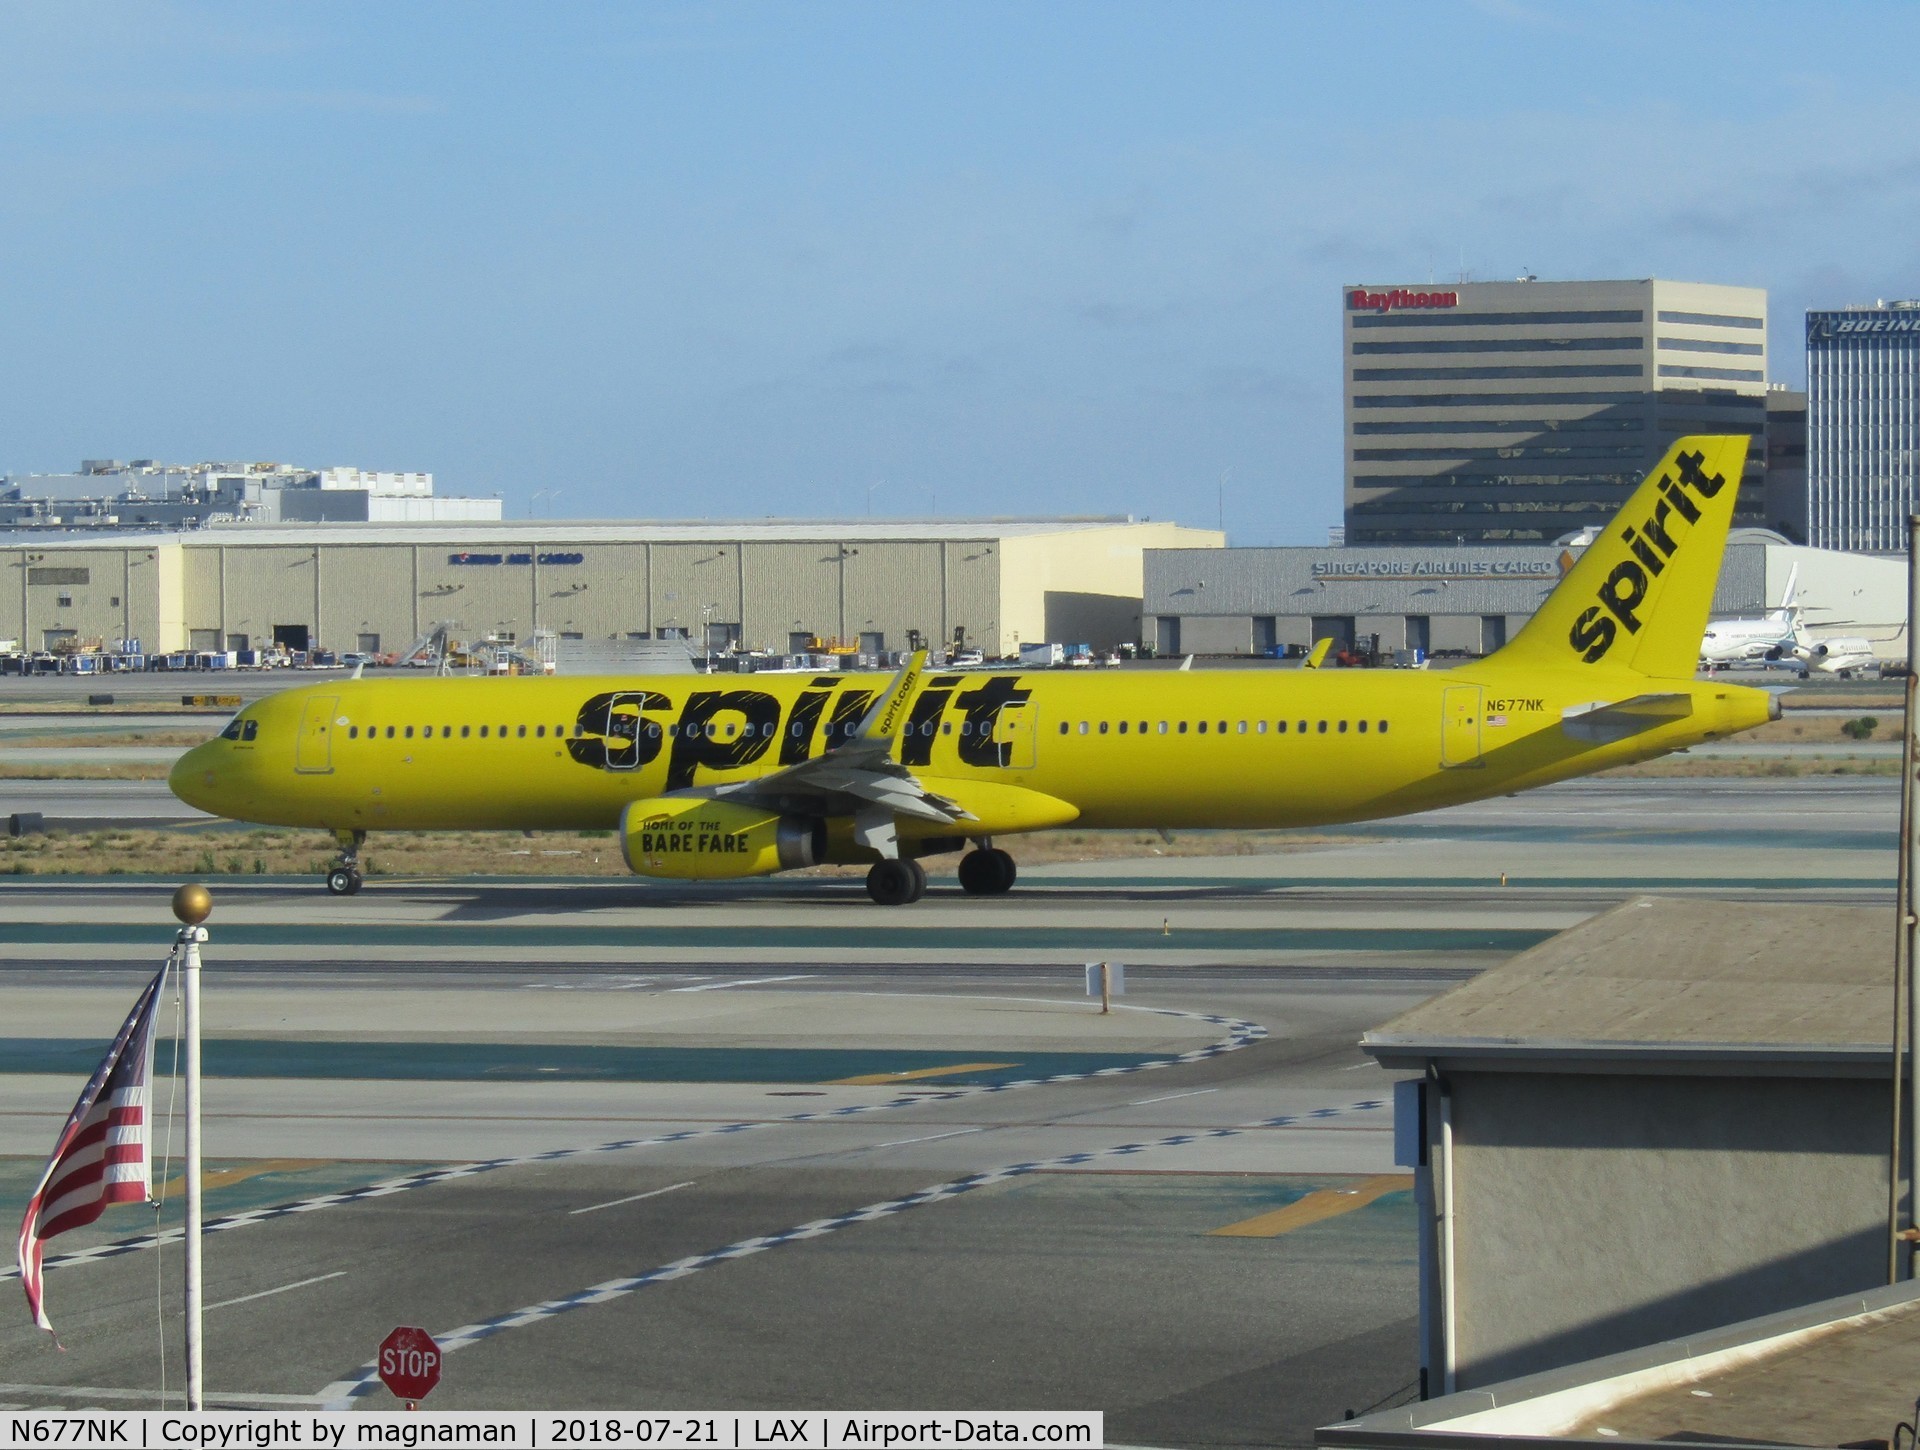 N677NK, 2017 Airbus A321-231 C/N 7690, lots of these spirit a/c here and at Chicago